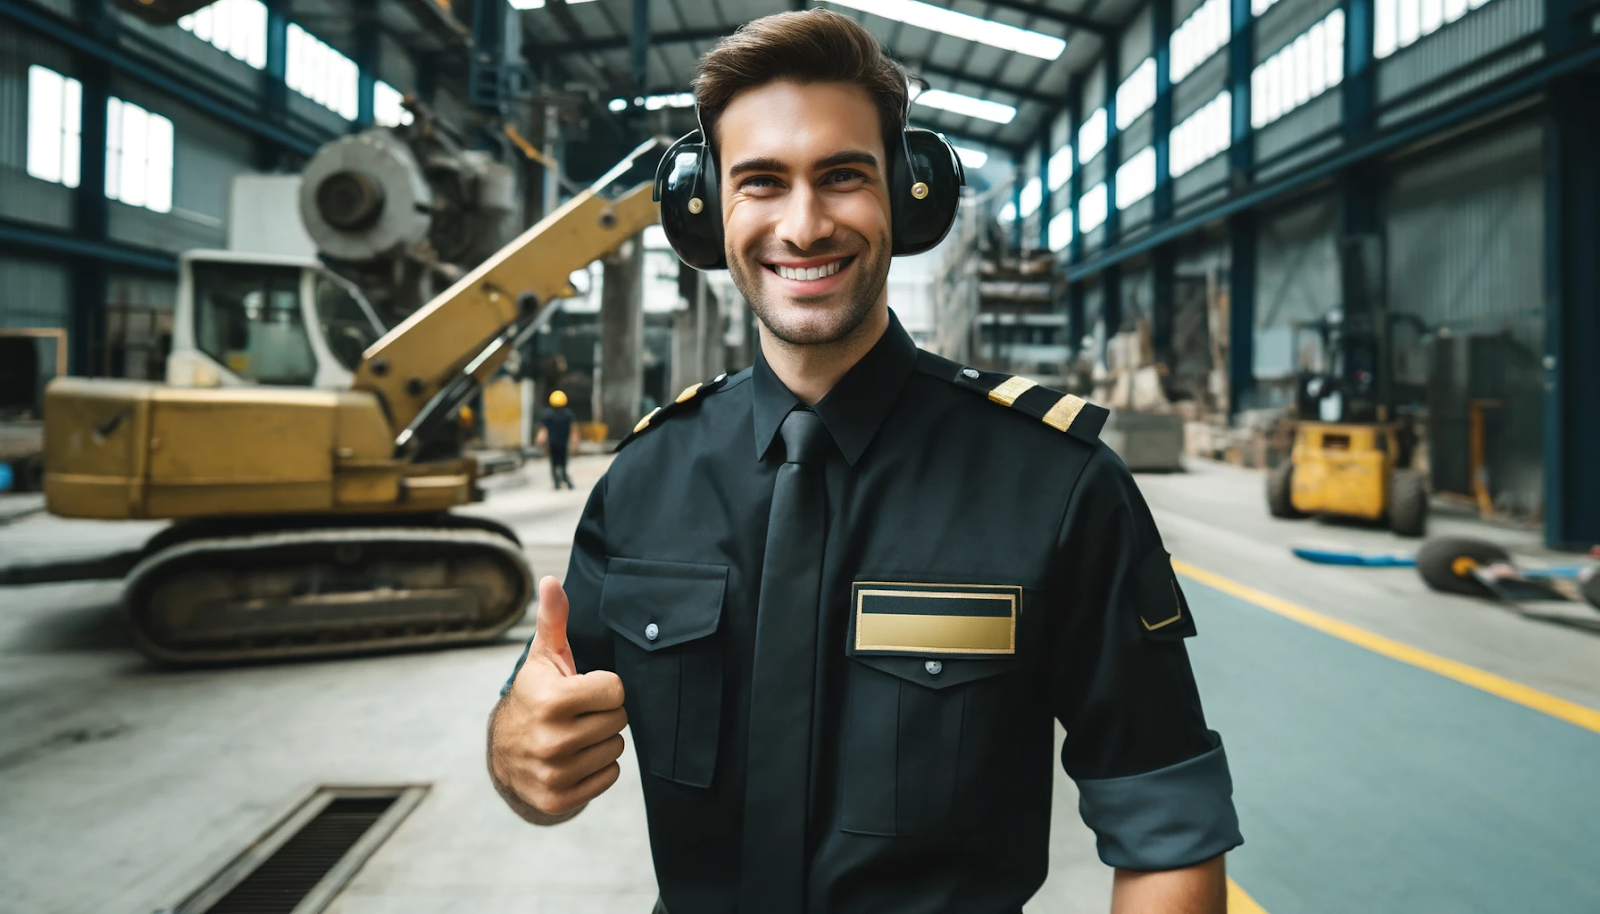 Cheerful security guard wearing hearing protection in a high-noise environment, ensuring safety and health.